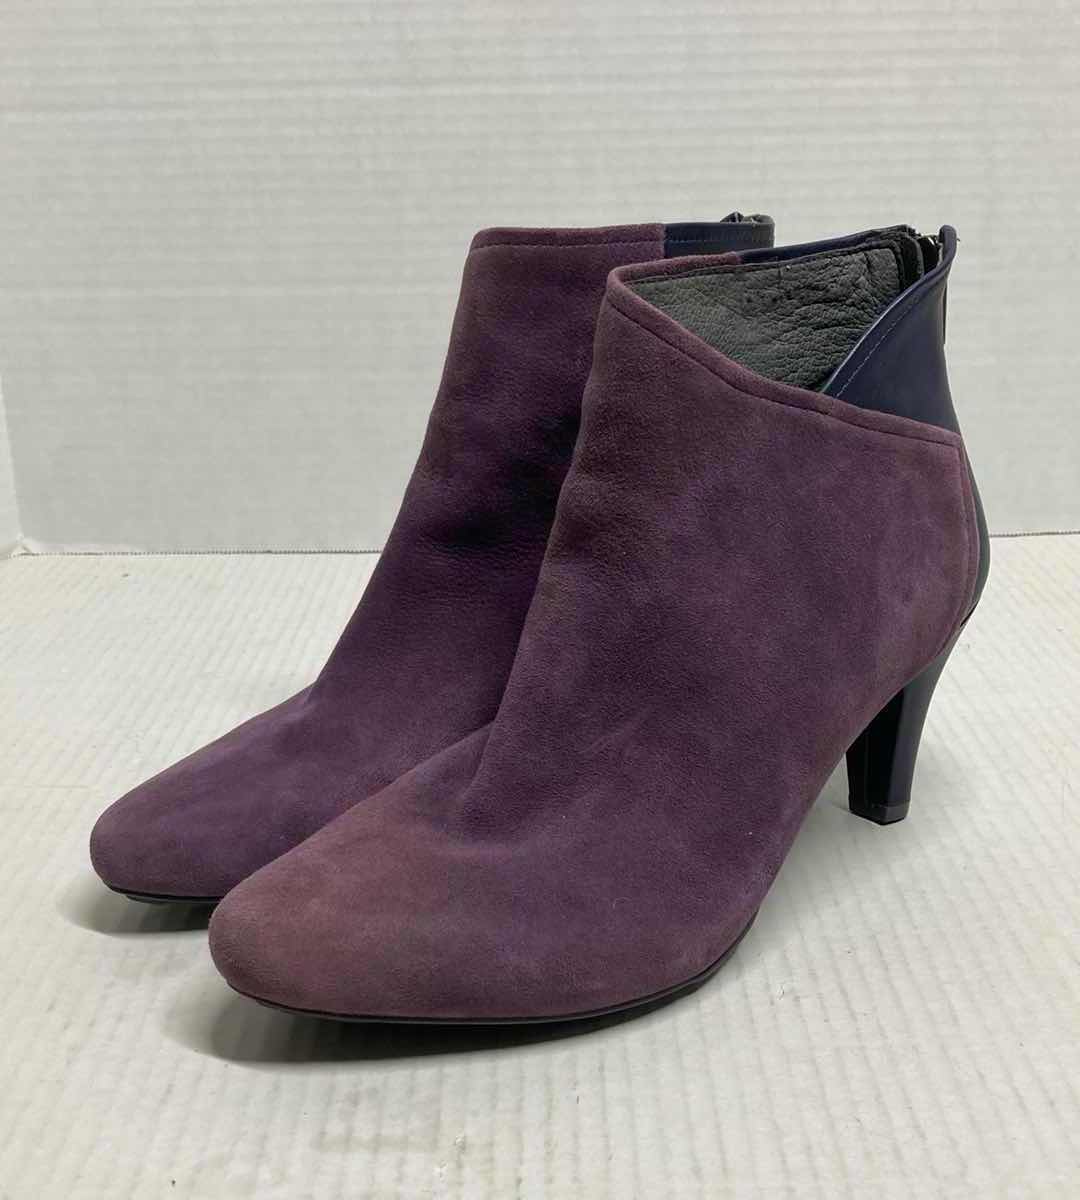 Photo 1 of TSUBO PURPLE & BLUE SUEDE LEATHER ANKLE HEEL BOOTS WOMAN’S SIZE 9